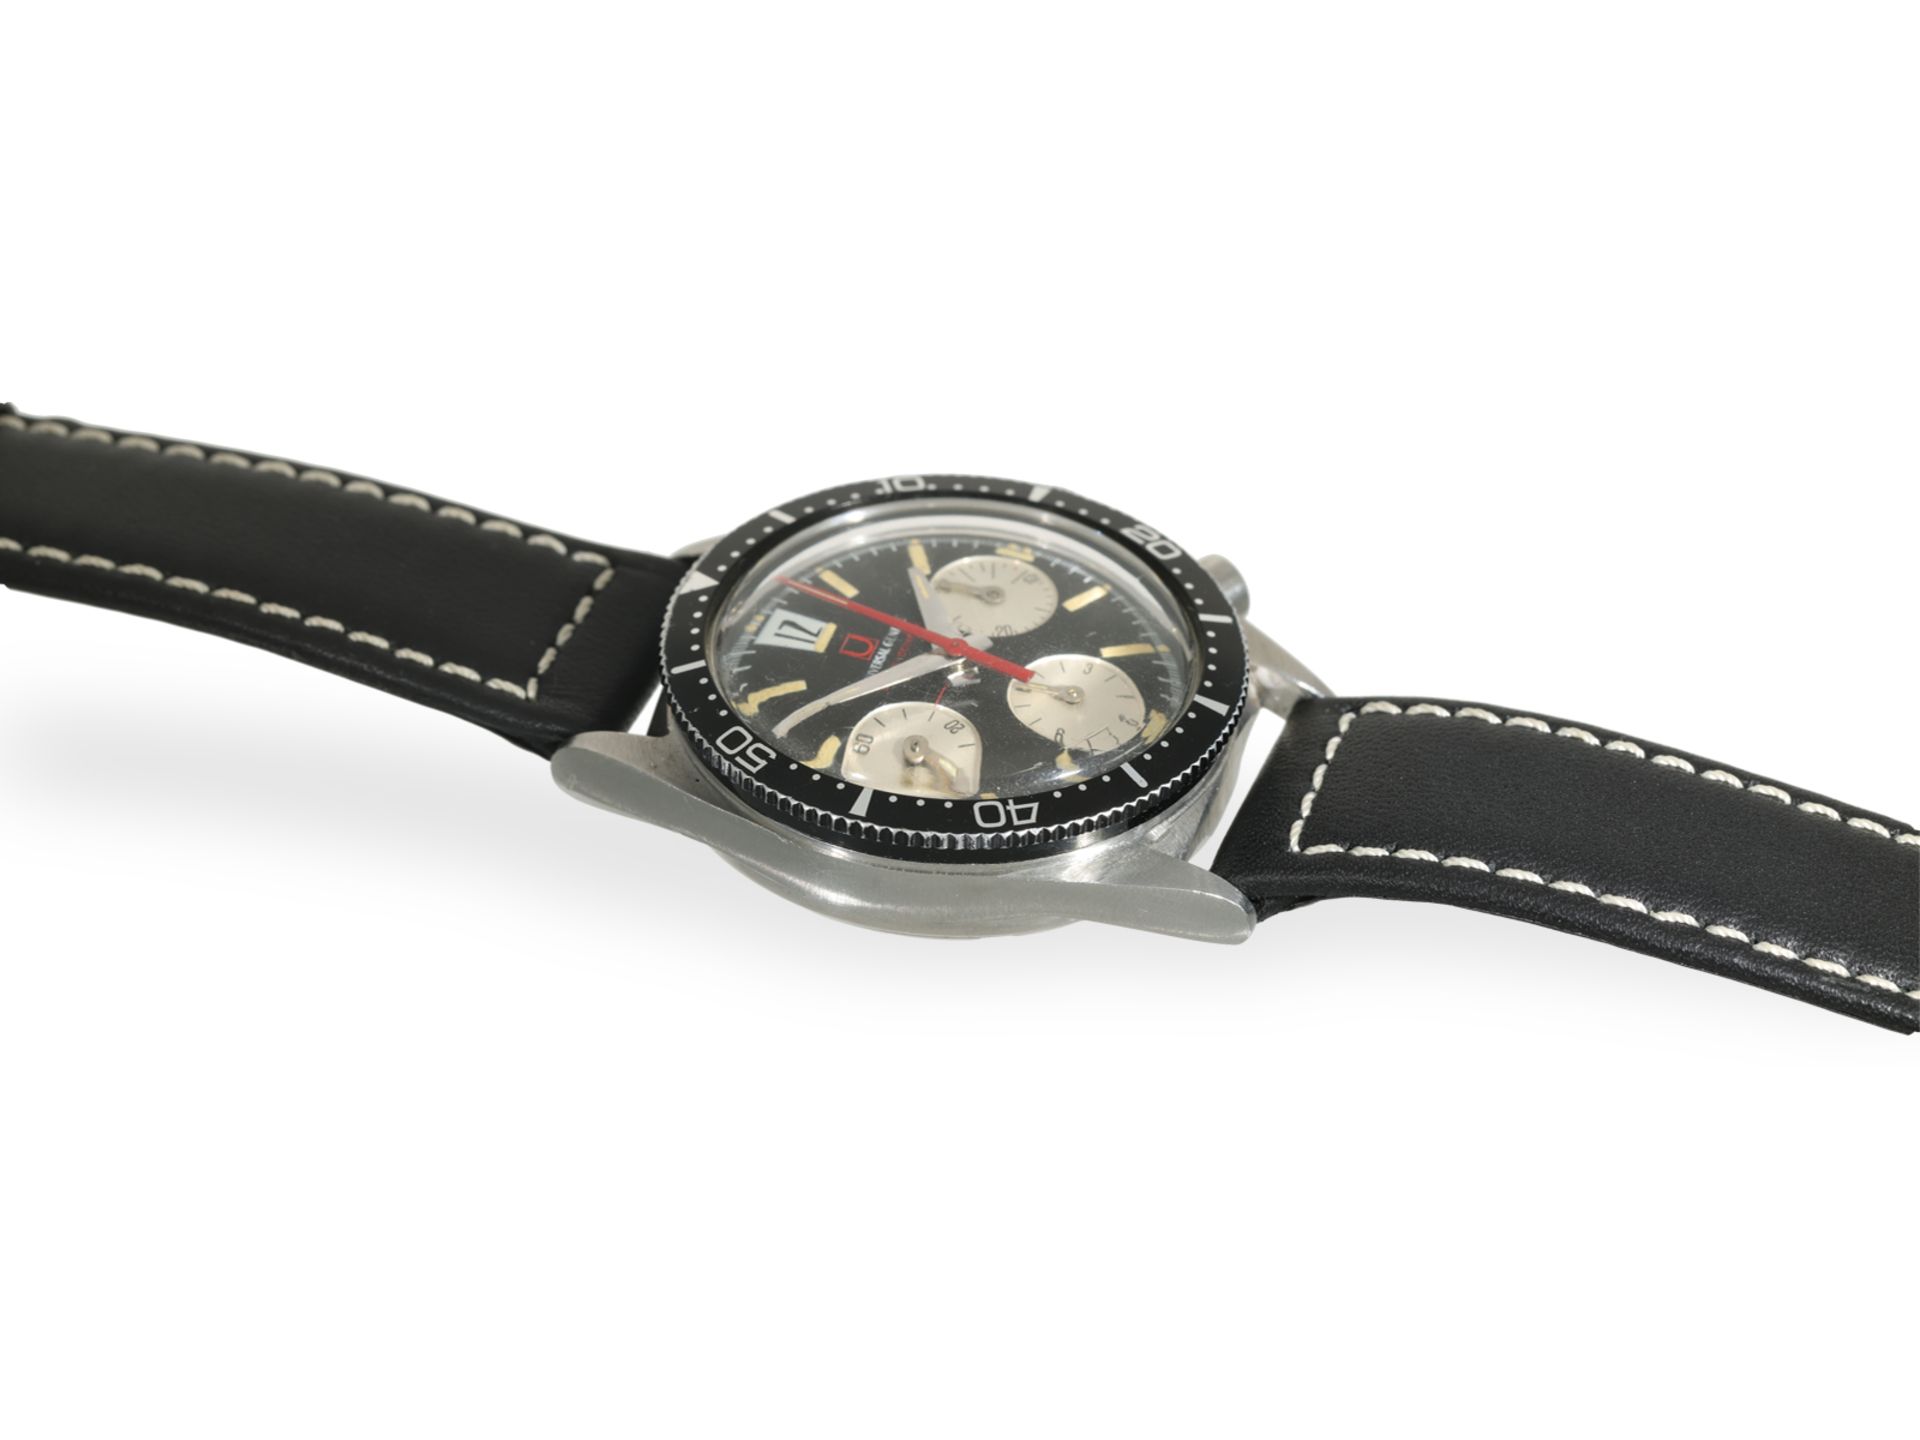 Wristwatch: vintage Sport Chronograph Universal Geneve Space Compax REF 885104/01, ca. 1970 - Image 4 of 6